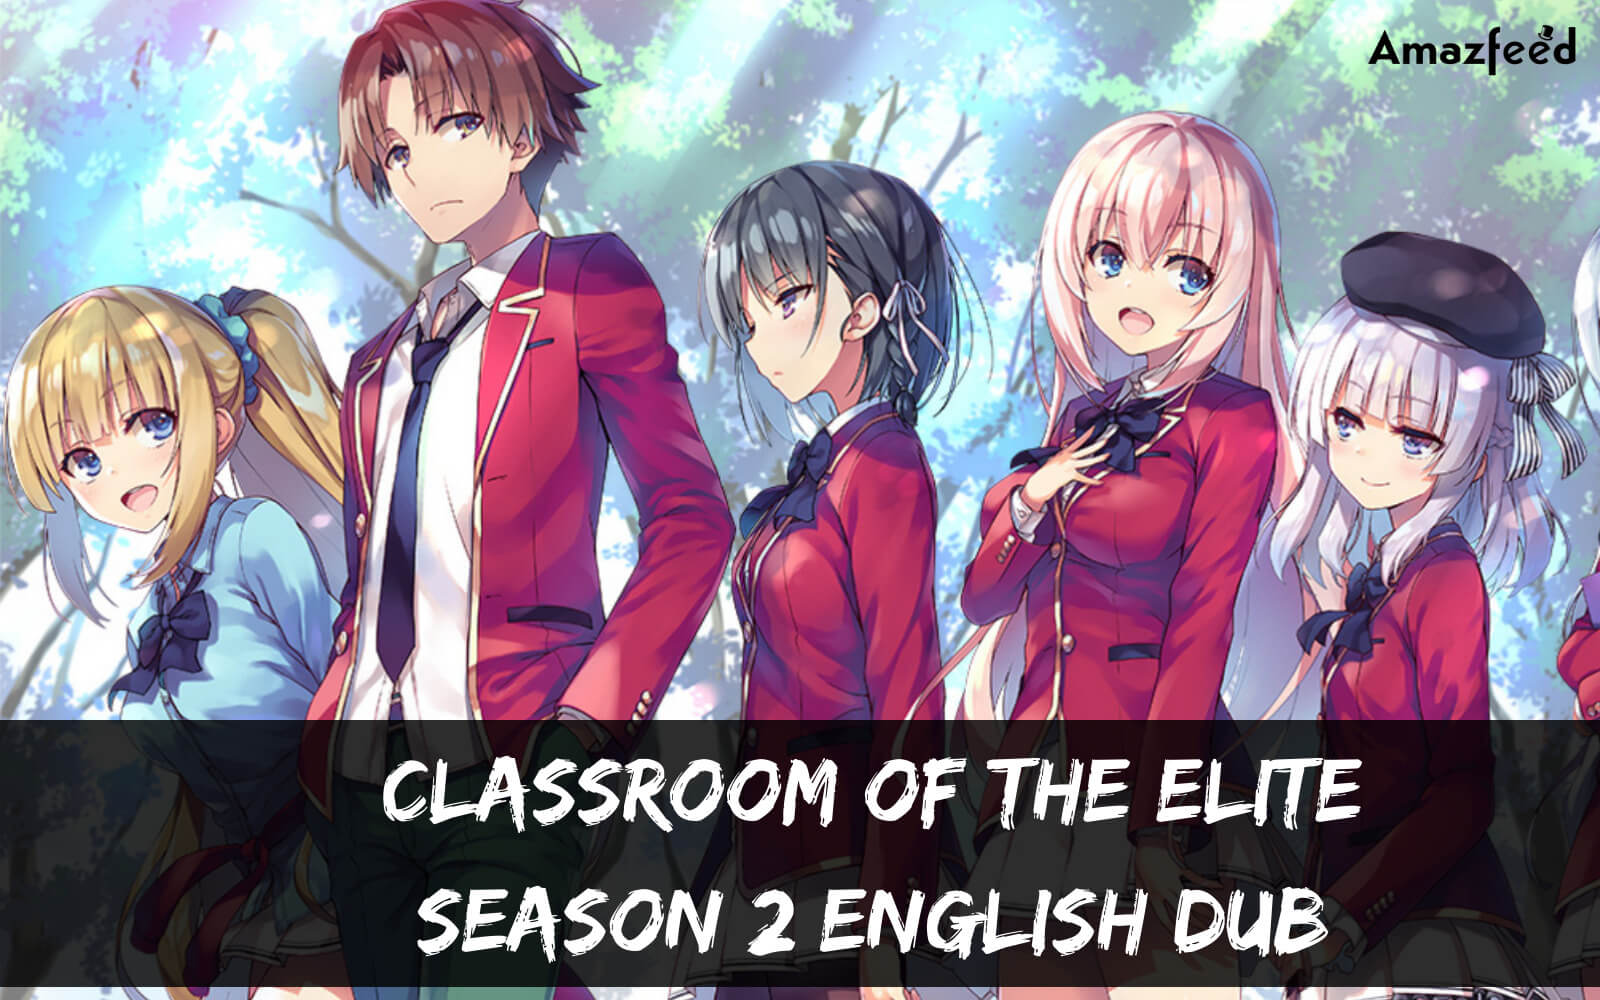 Classroom of the Elite Season 2 Episode 2 Release Date And Time